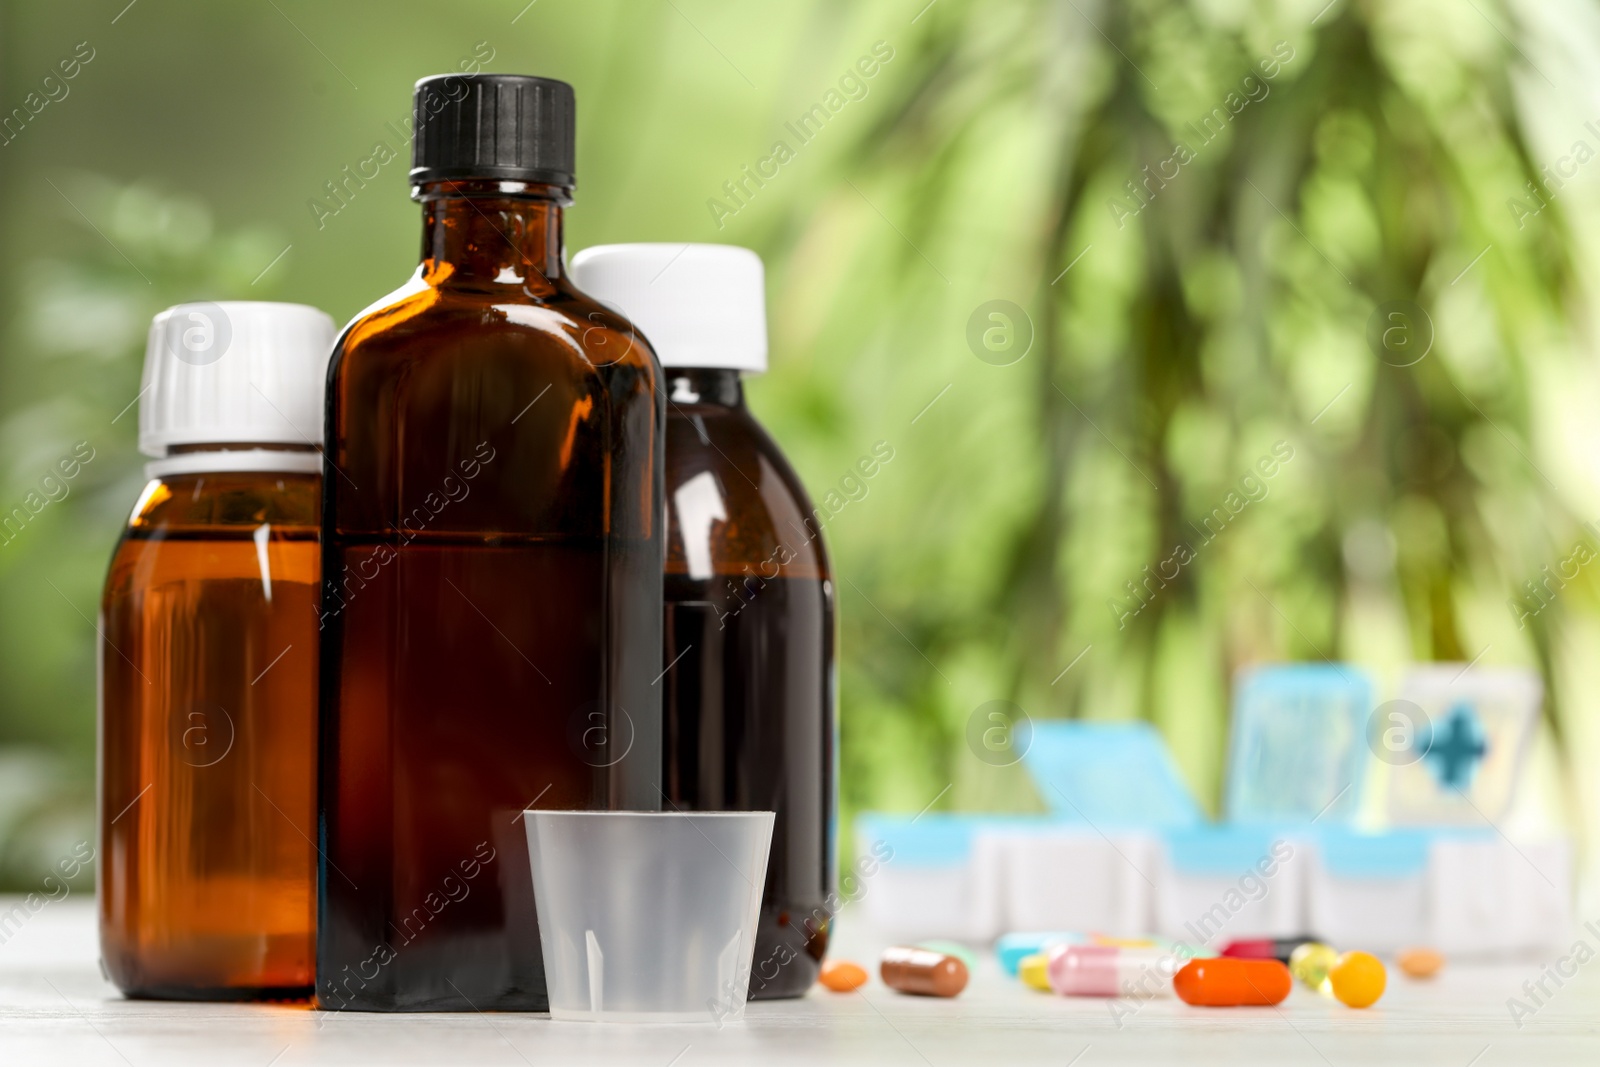 Photo of Bottles of syrup, measuring cup and pills on table against blurred background, space for text. Cold medicine